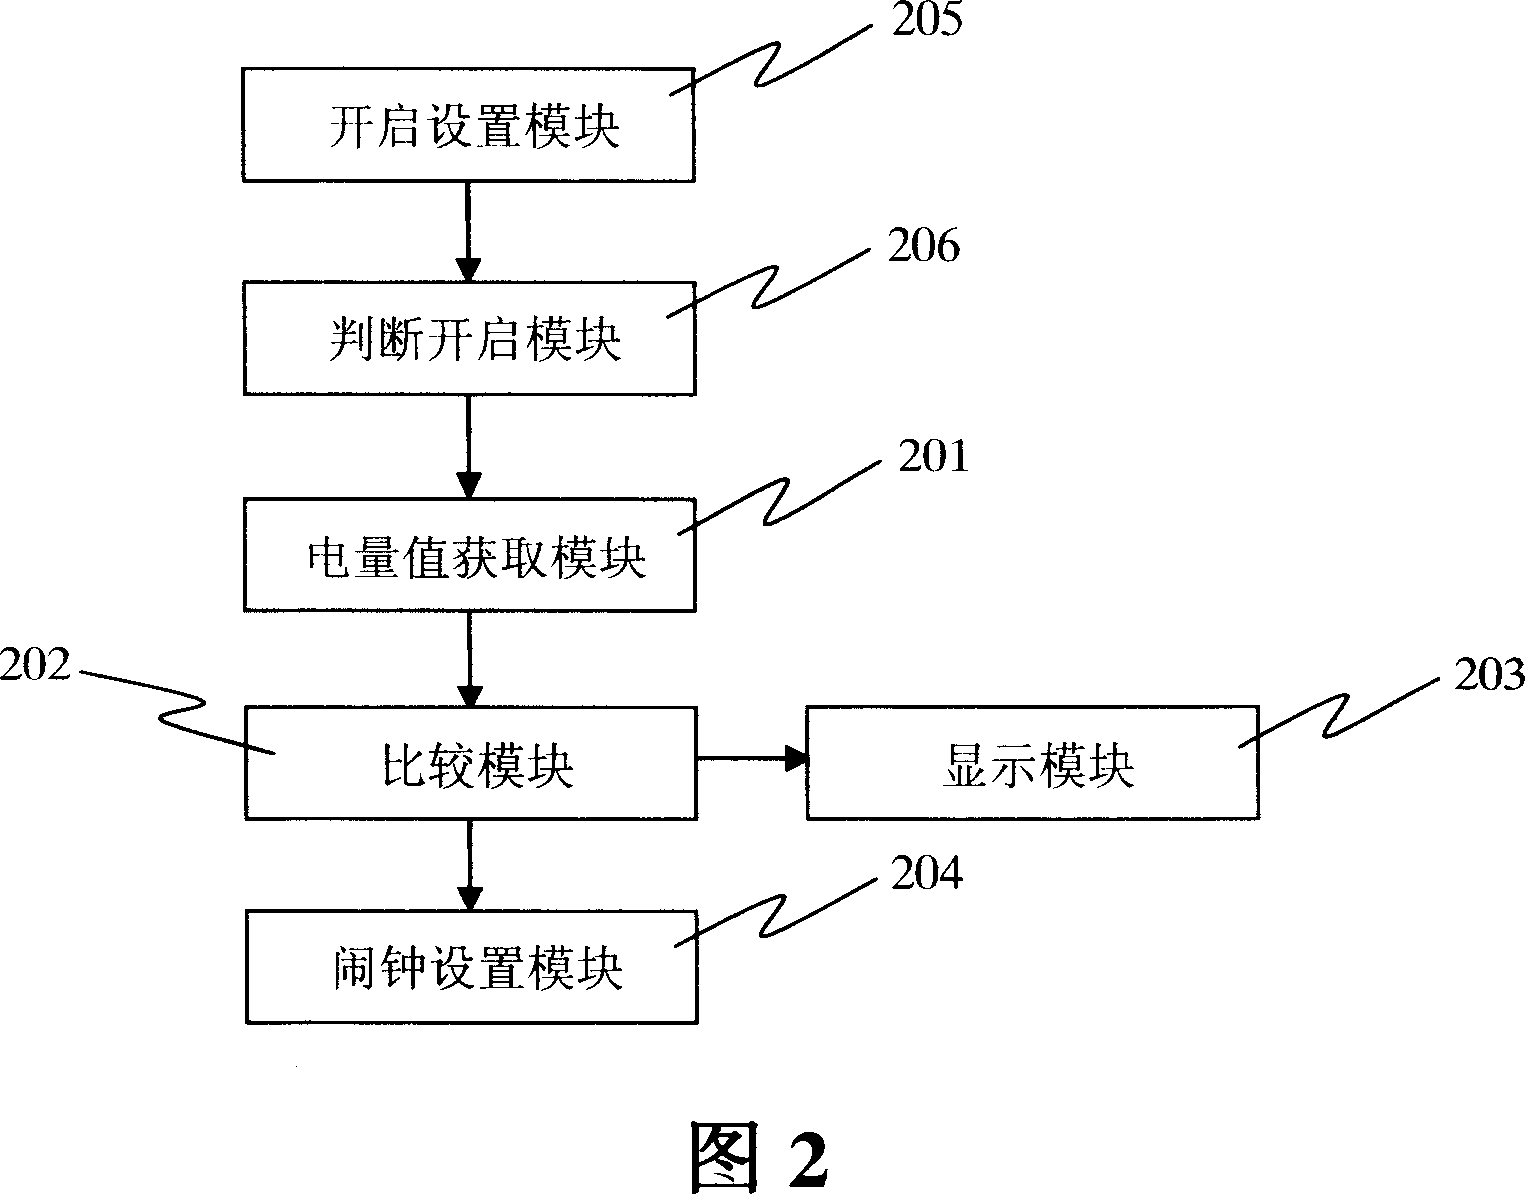 Mobile terminal alarm-clock power supply management method and system